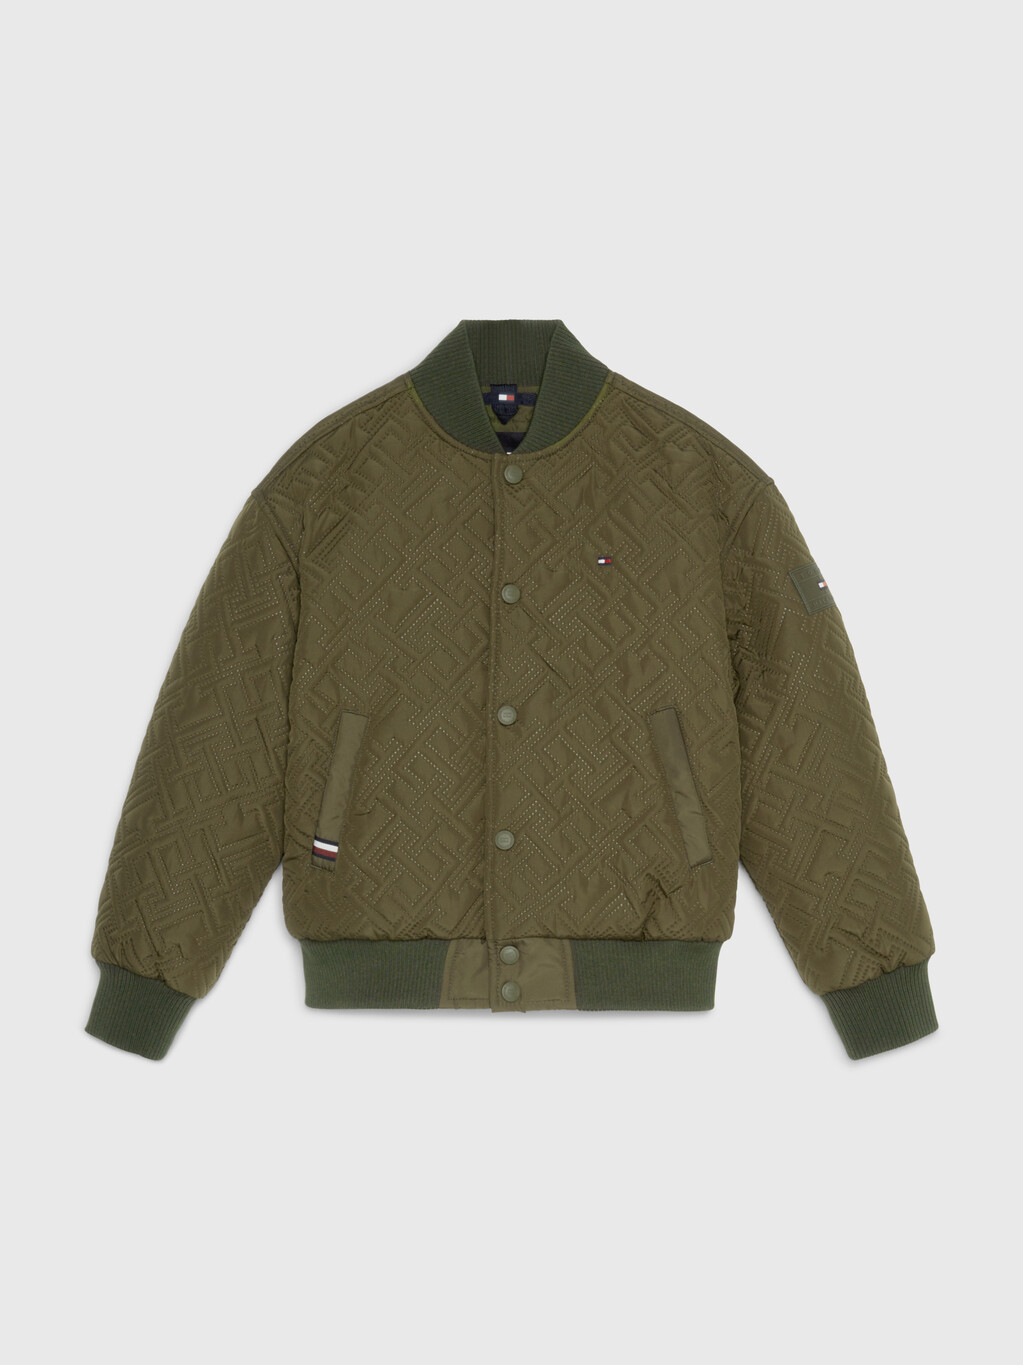 TH Monogram Quilted Bomber Jacket, Drab Olive Green, hi-res